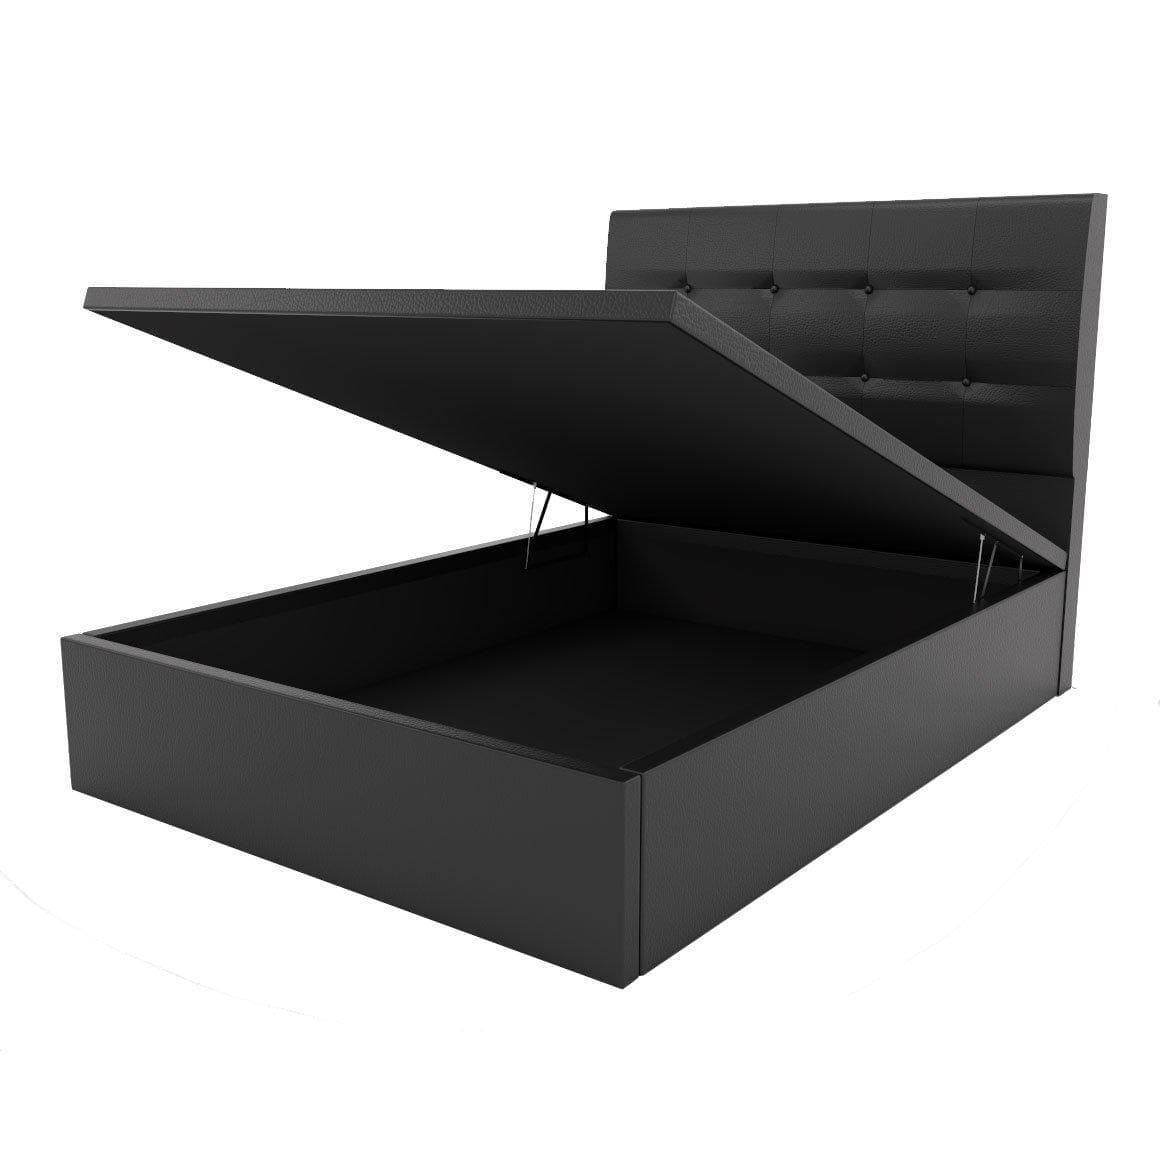 Ellie Faux Leather Storage Bed Singapore